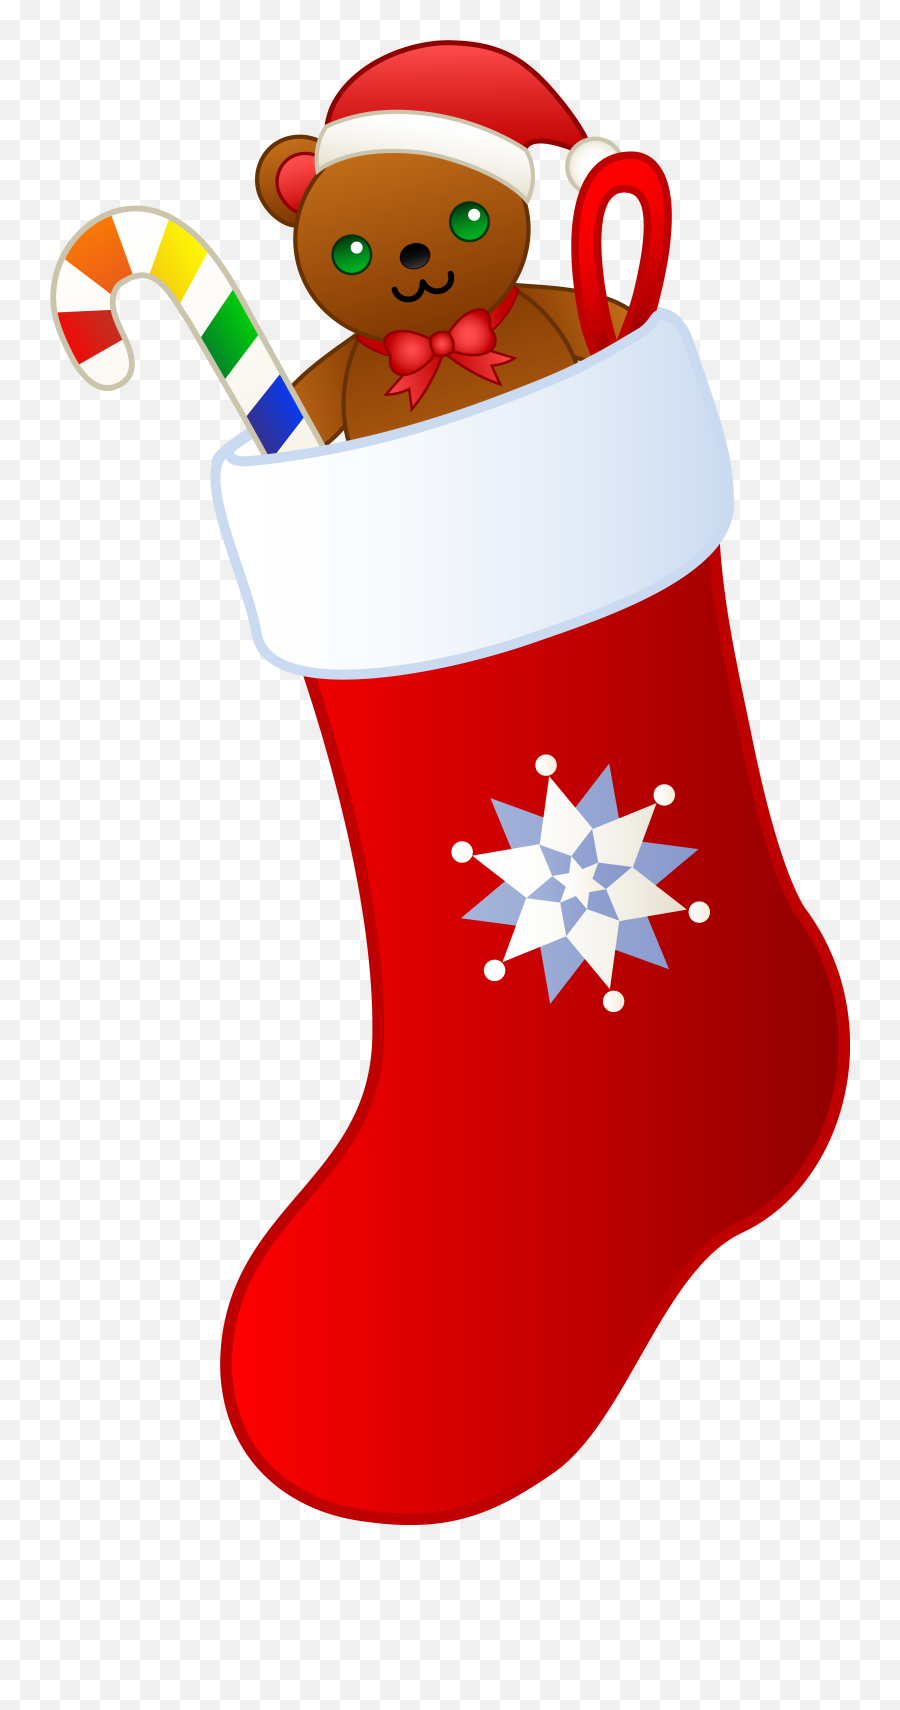 Free Christmas Pictures Cartoon Download Free Clip Art - Clip Art Christmas Socks Emoji,Free Christmas Emoticons